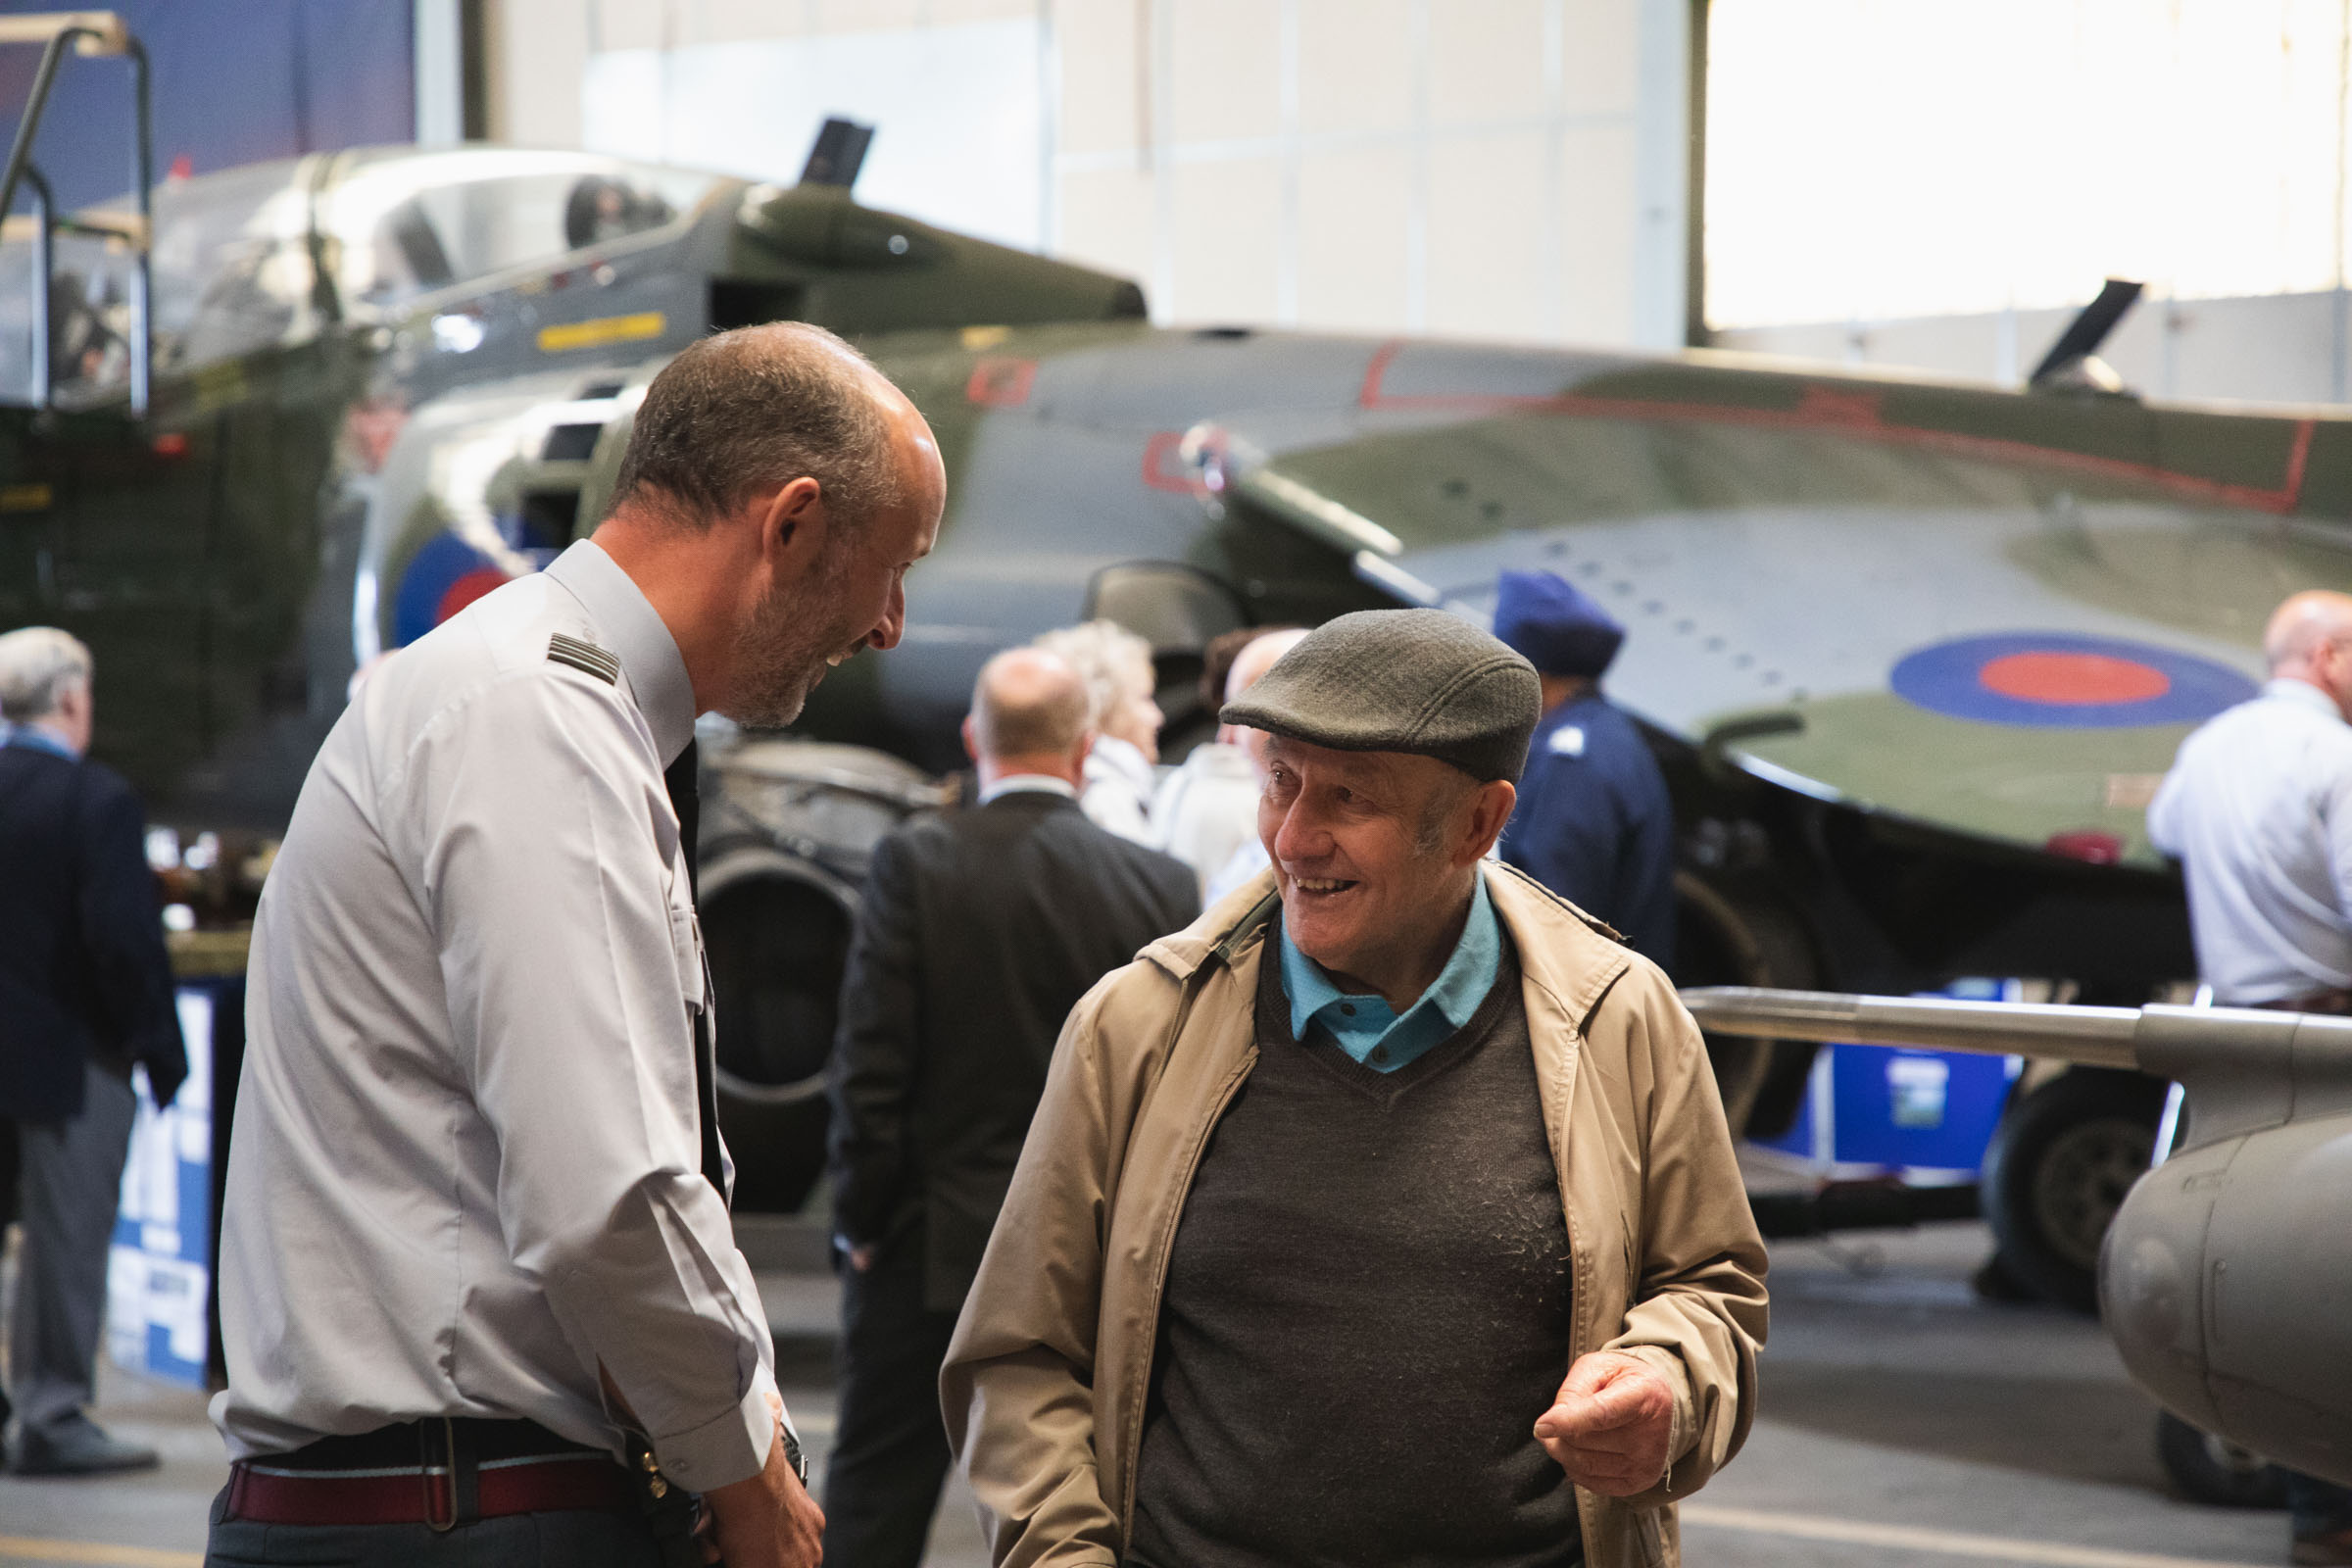 Wing Commander Jez Case in conversation with one of the guests